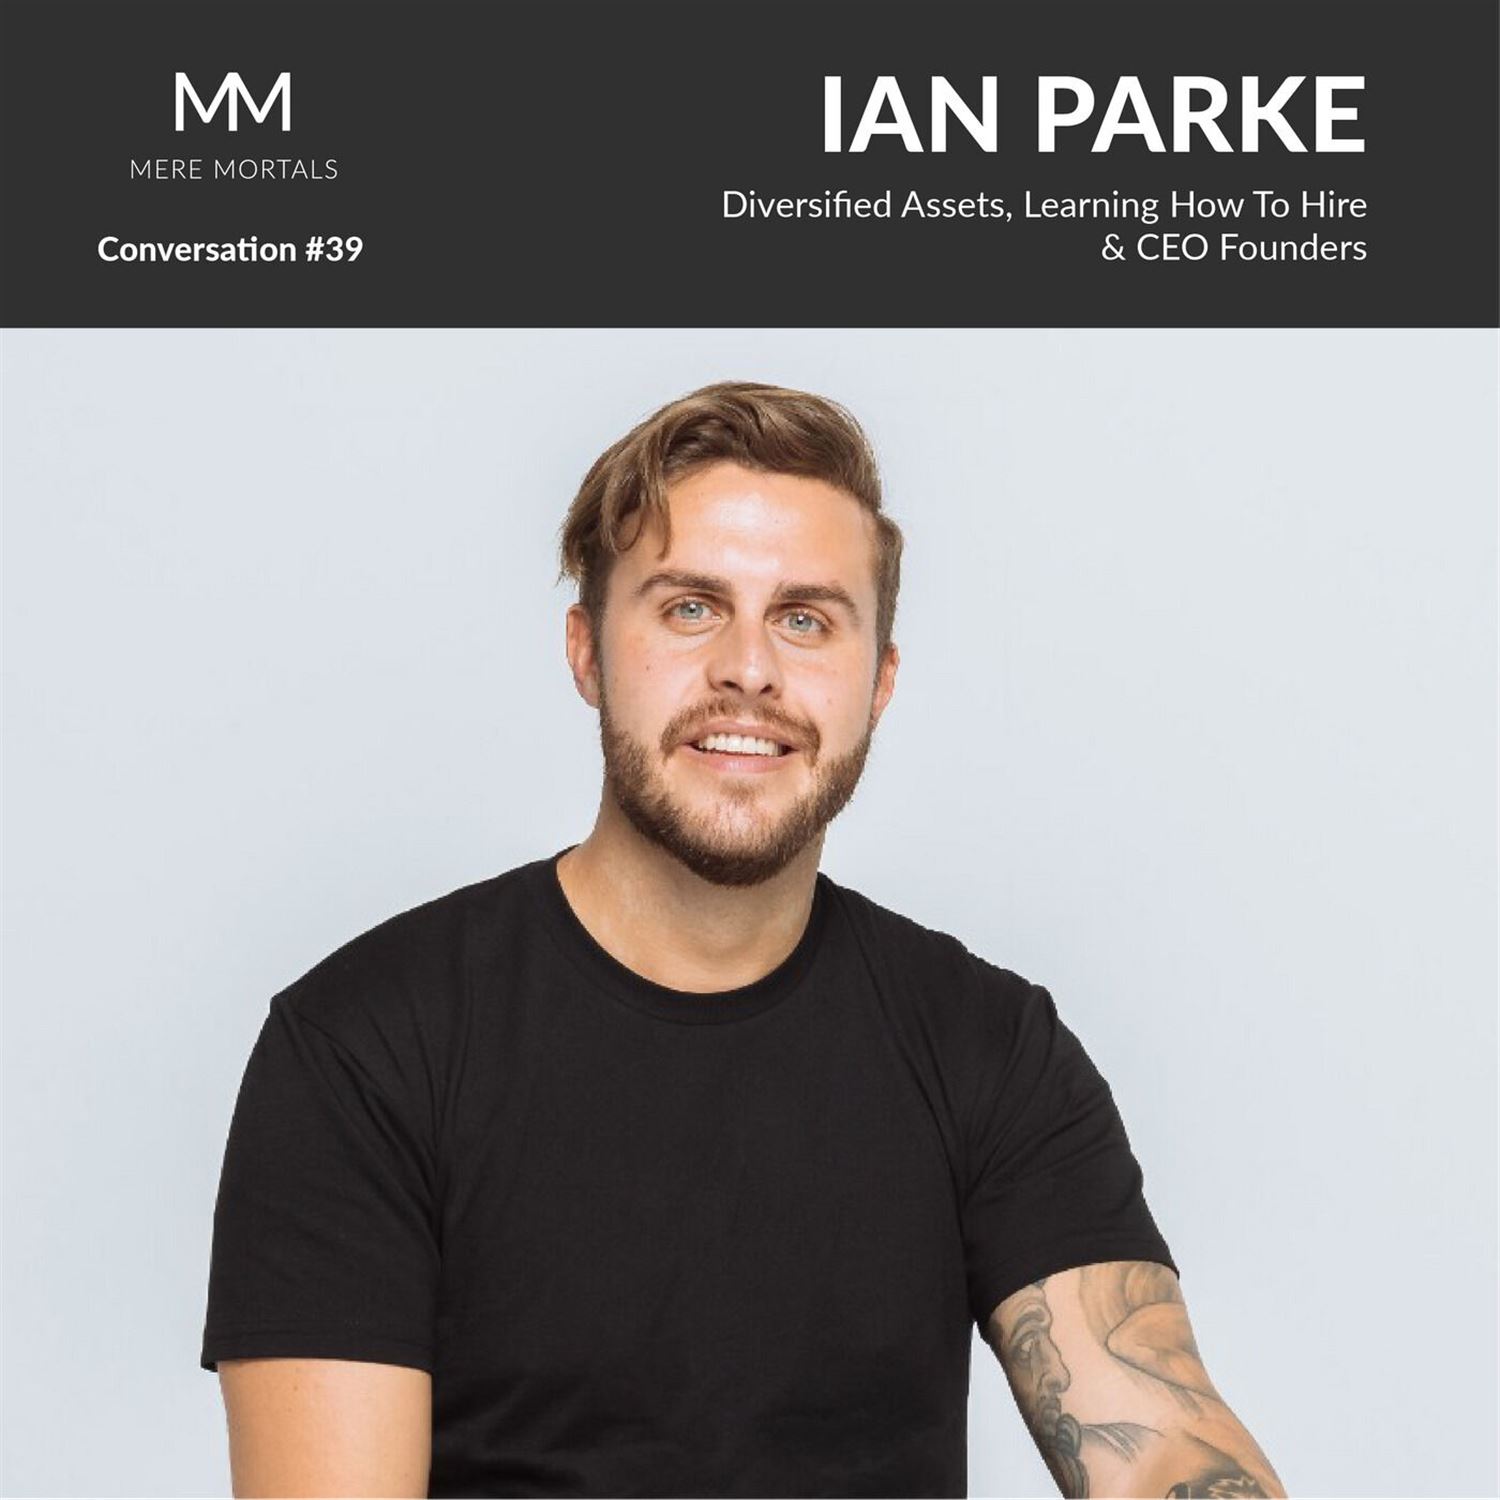 IAN PARKE | Diversified Assets, Learning How To Hire & CEO Founders: Mere Mortals Conversation #39